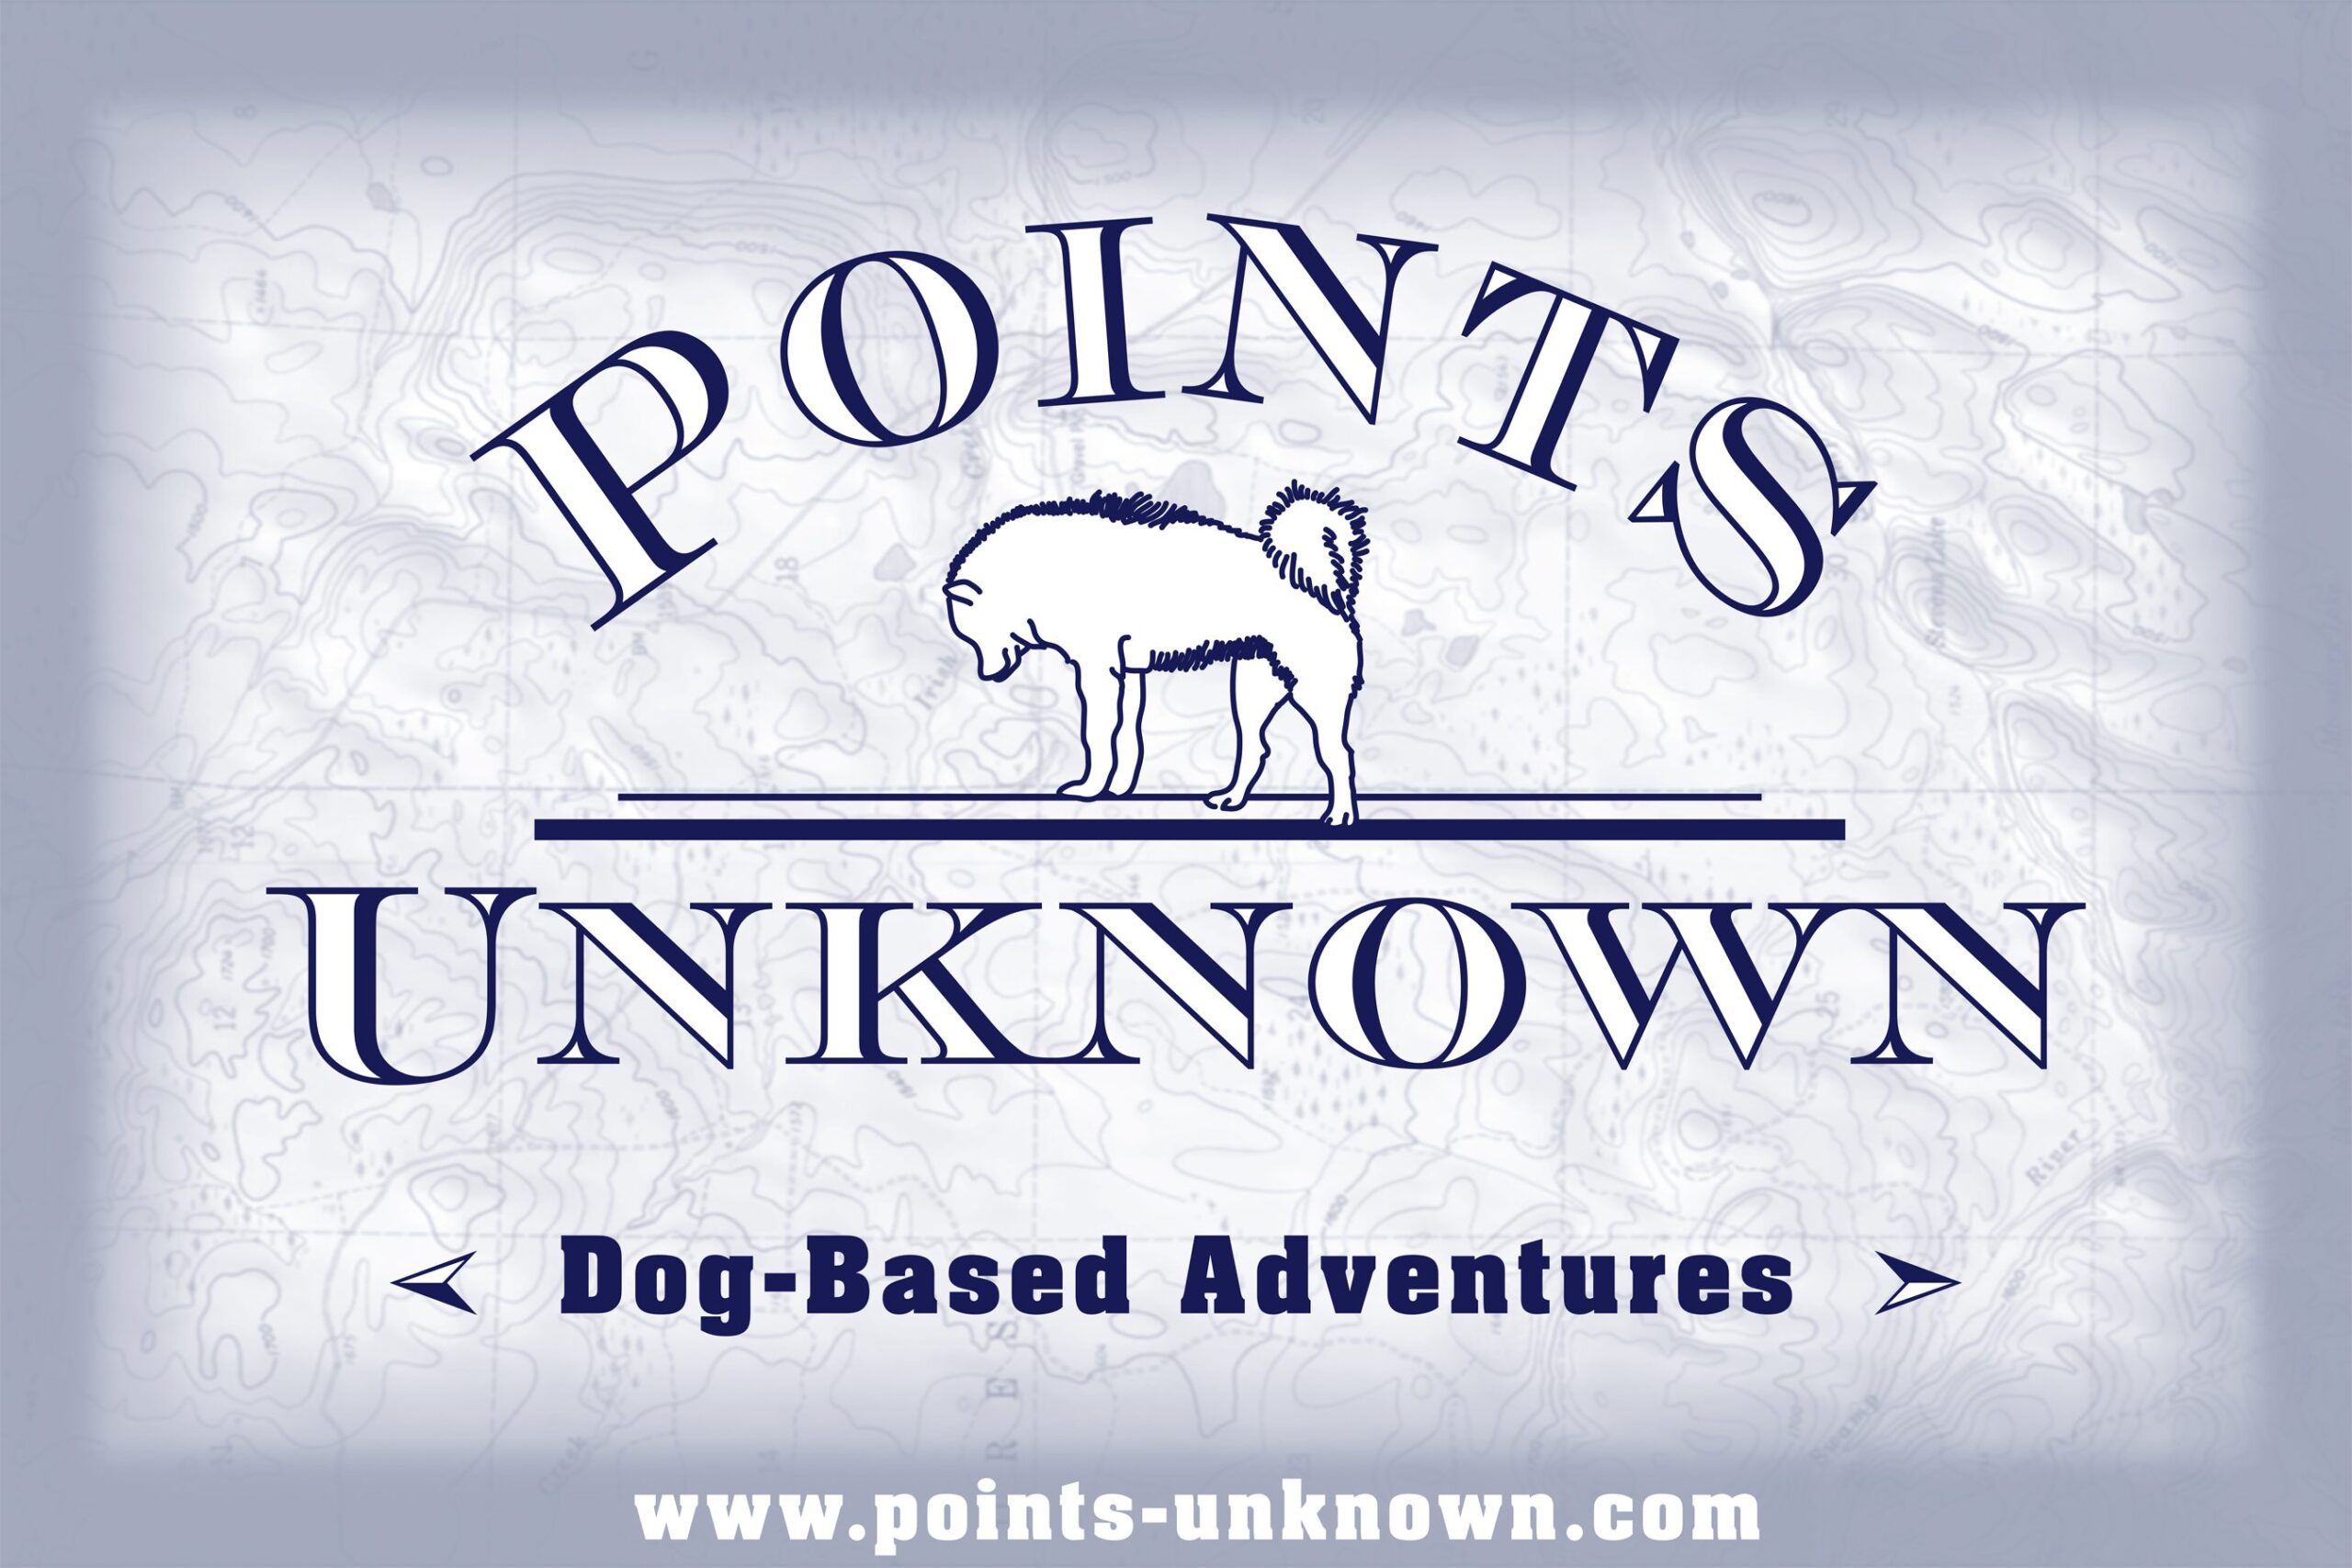 Image of Points Unknown logo.